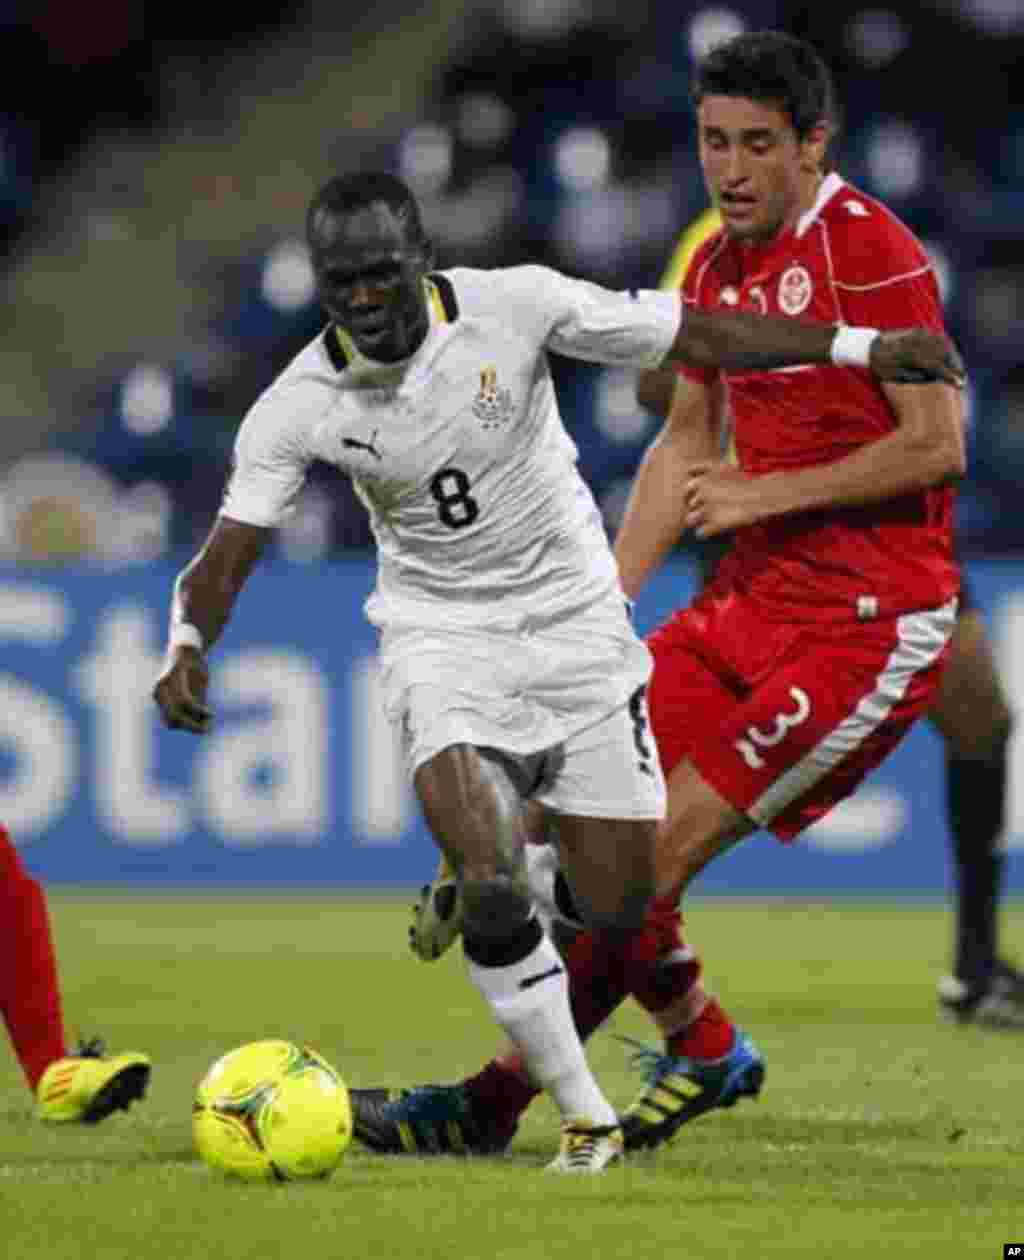 Ghana's Emmaneul Badu Agyemang (L) fights for the ball with Tunisia's Karim Haggui during their African Nations Cup quarter-final soccer match at Franceville stadium February 5, 2012.